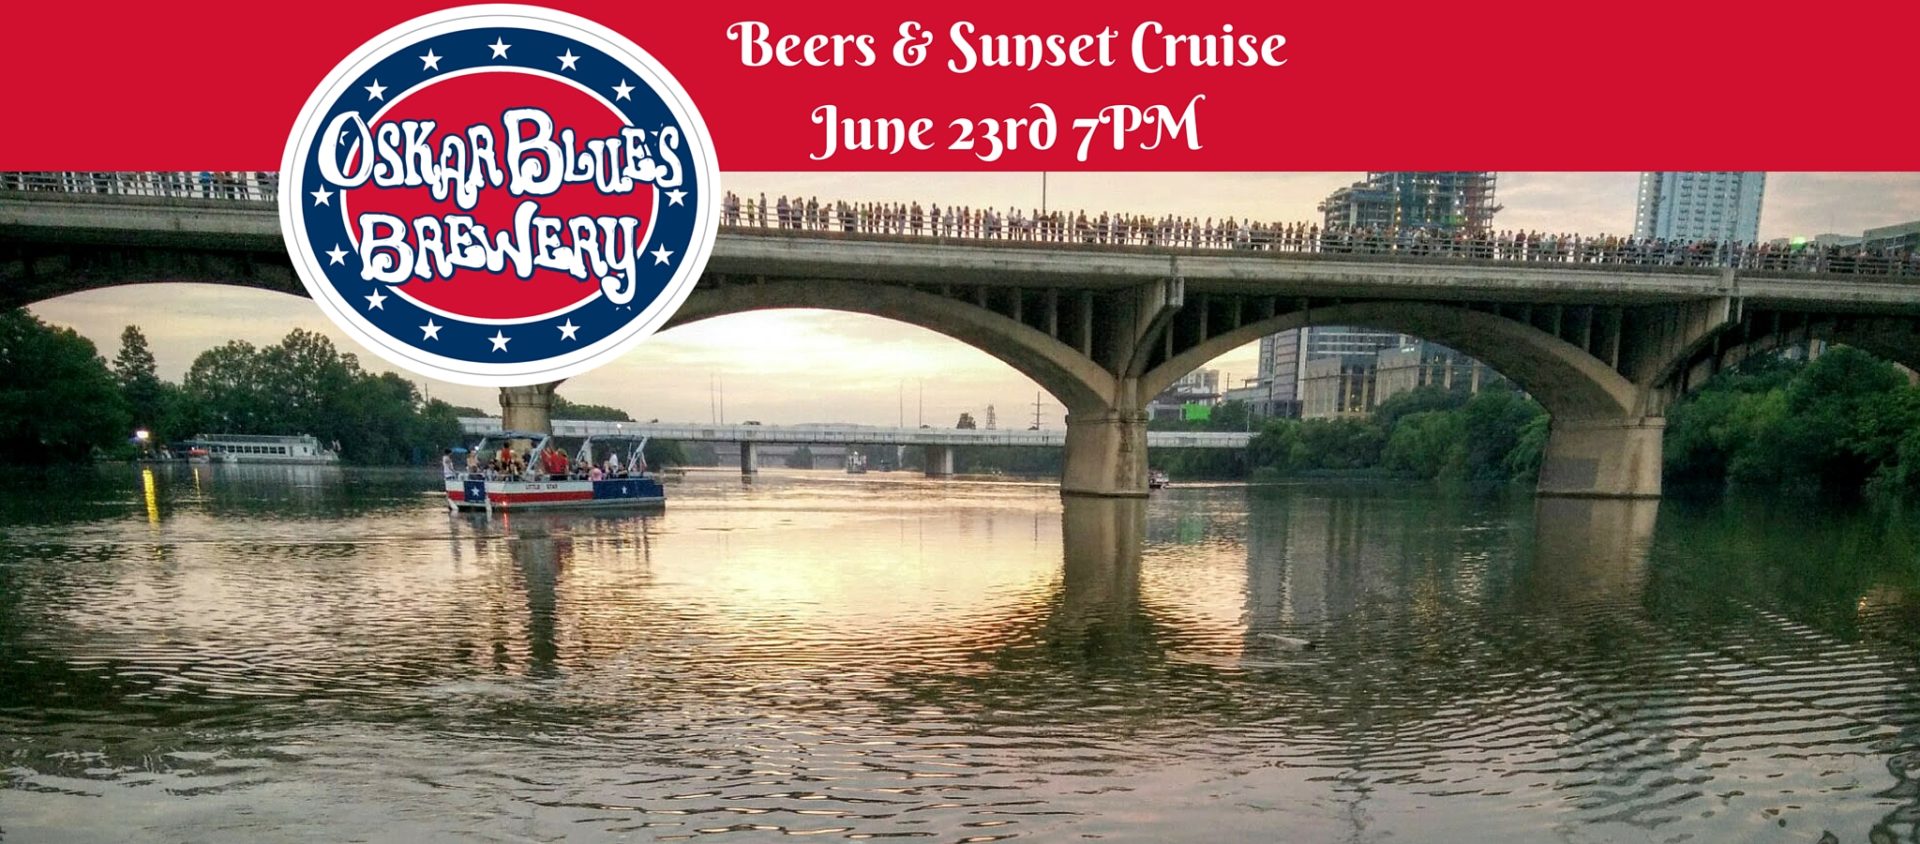 Beers & Sunset Cruise June 23rd 7PM